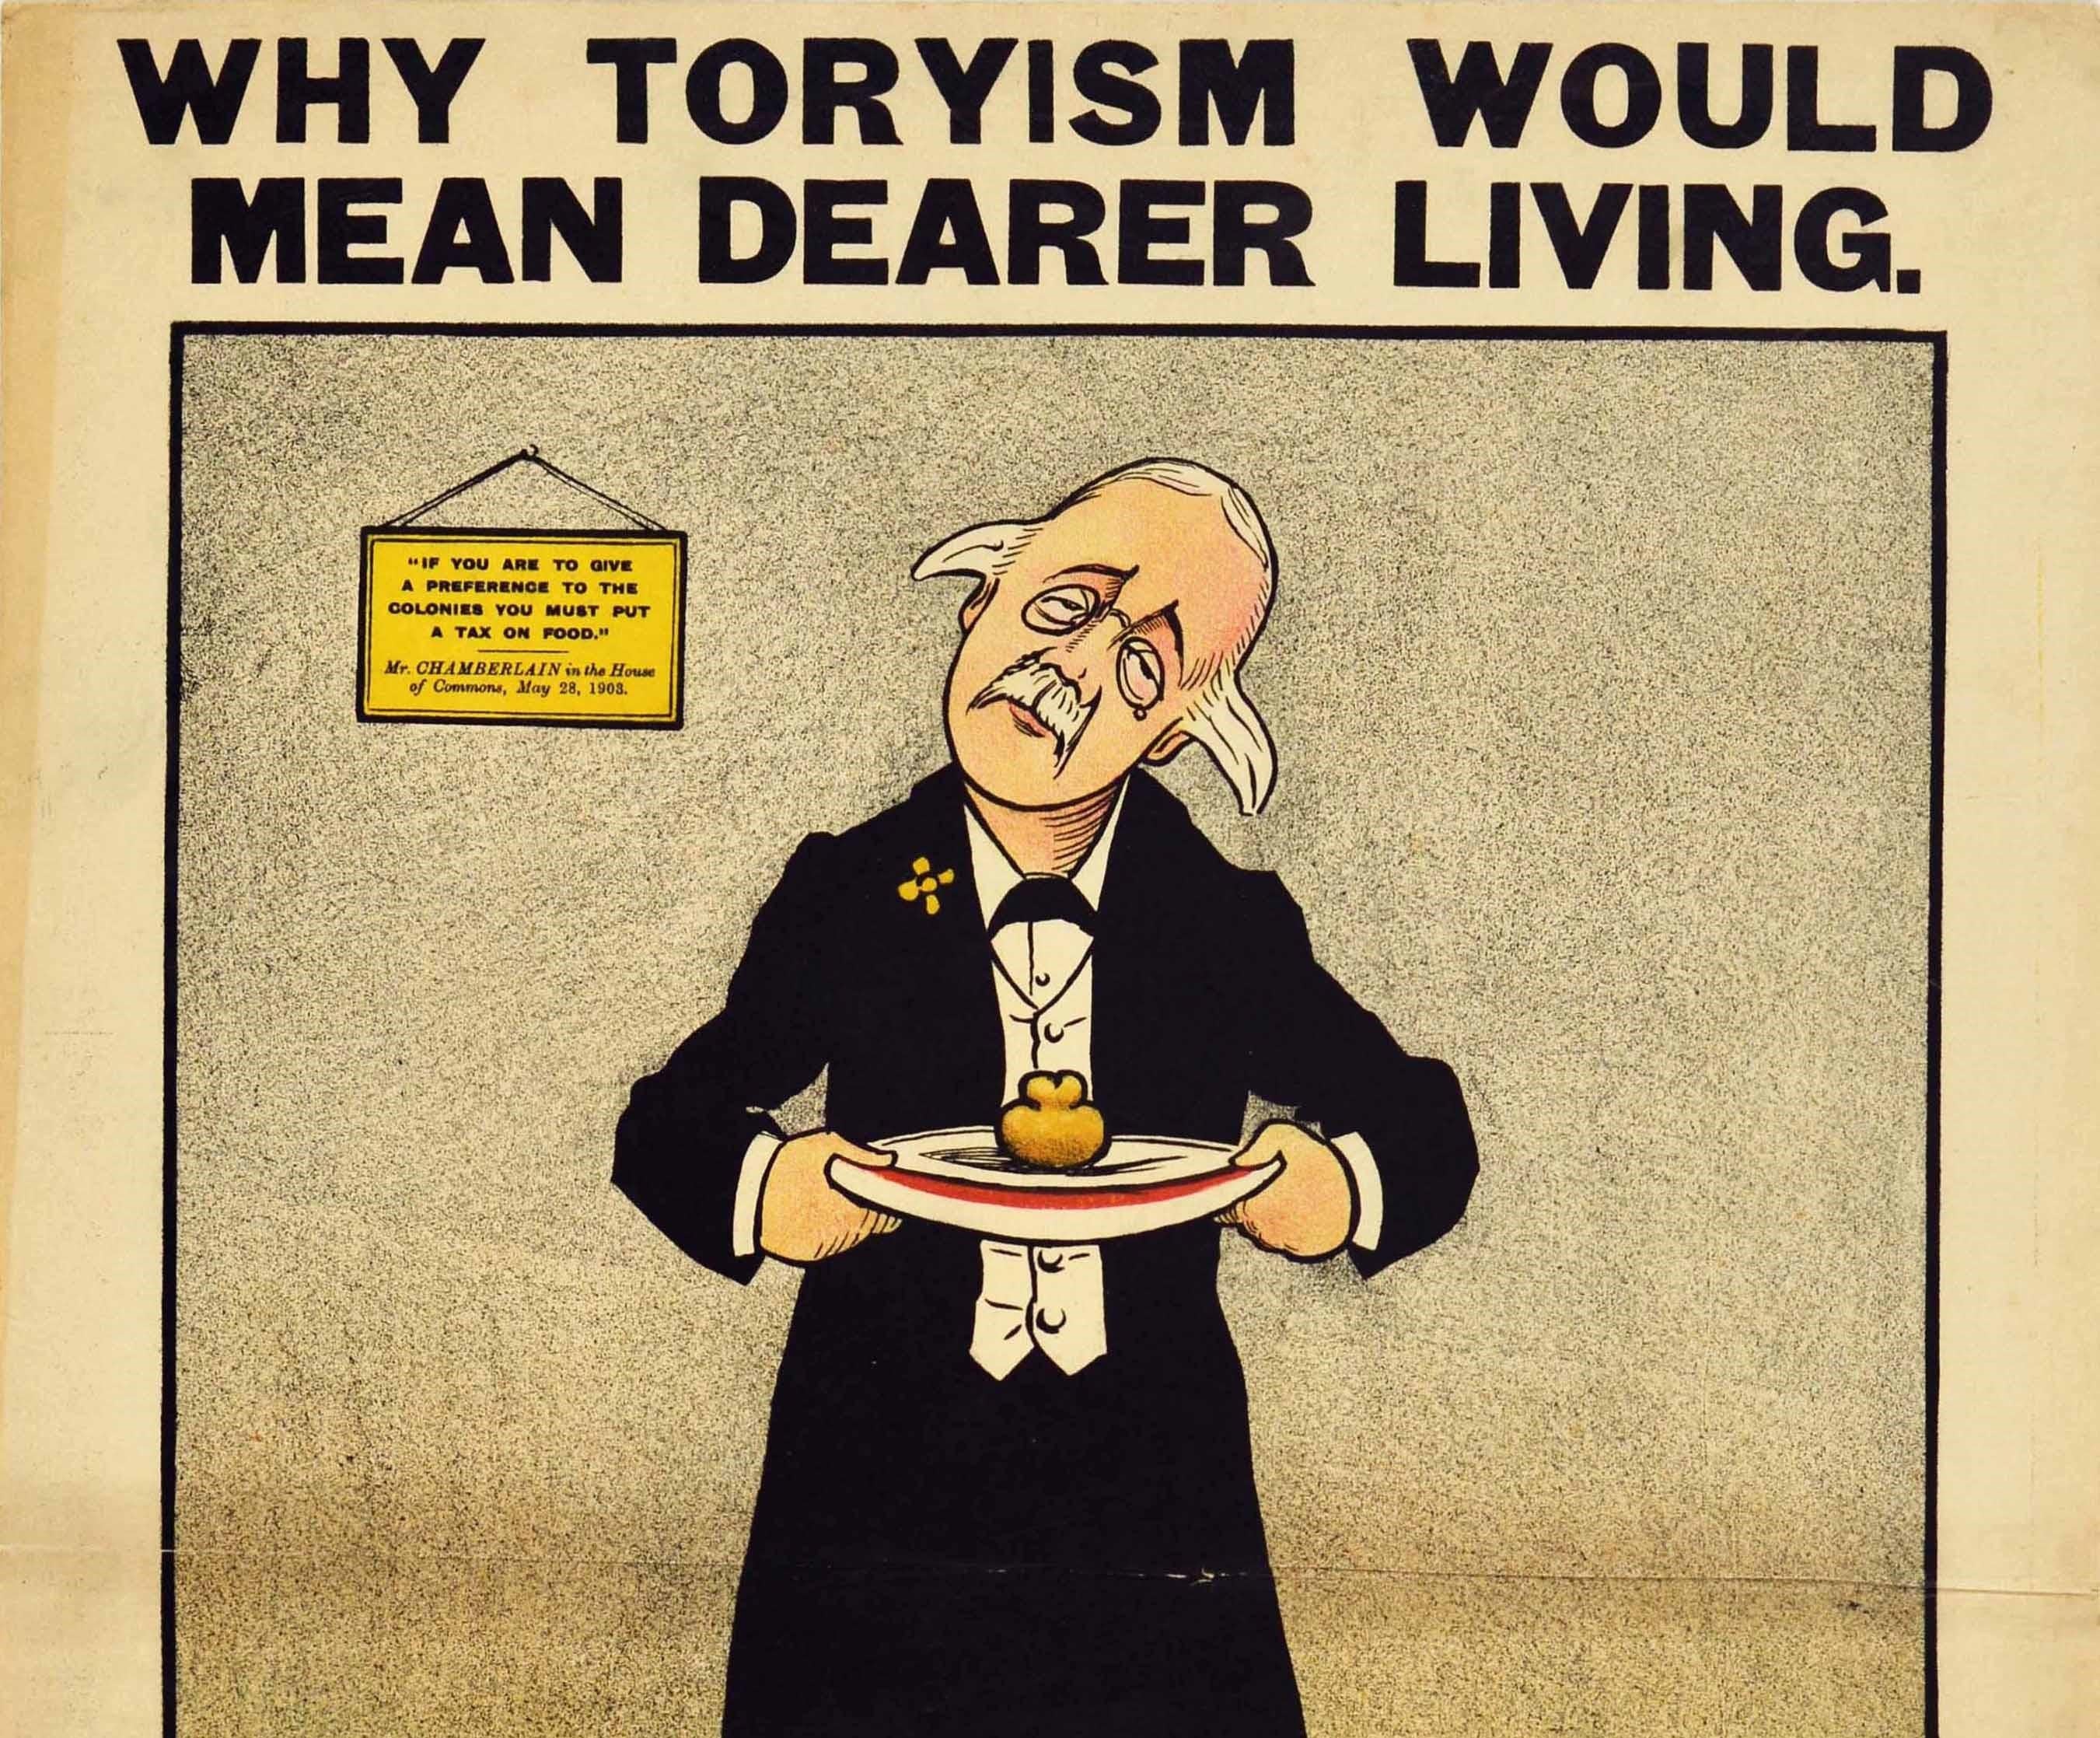 Original antique political election propaganda poster issued by the Liberal Party - Why Toryism Would Mean Dearer Living - featuring an illustration depicting the British Conservative statesman Arthur James Balfour 1st Earl of Balfour (1848-1930;